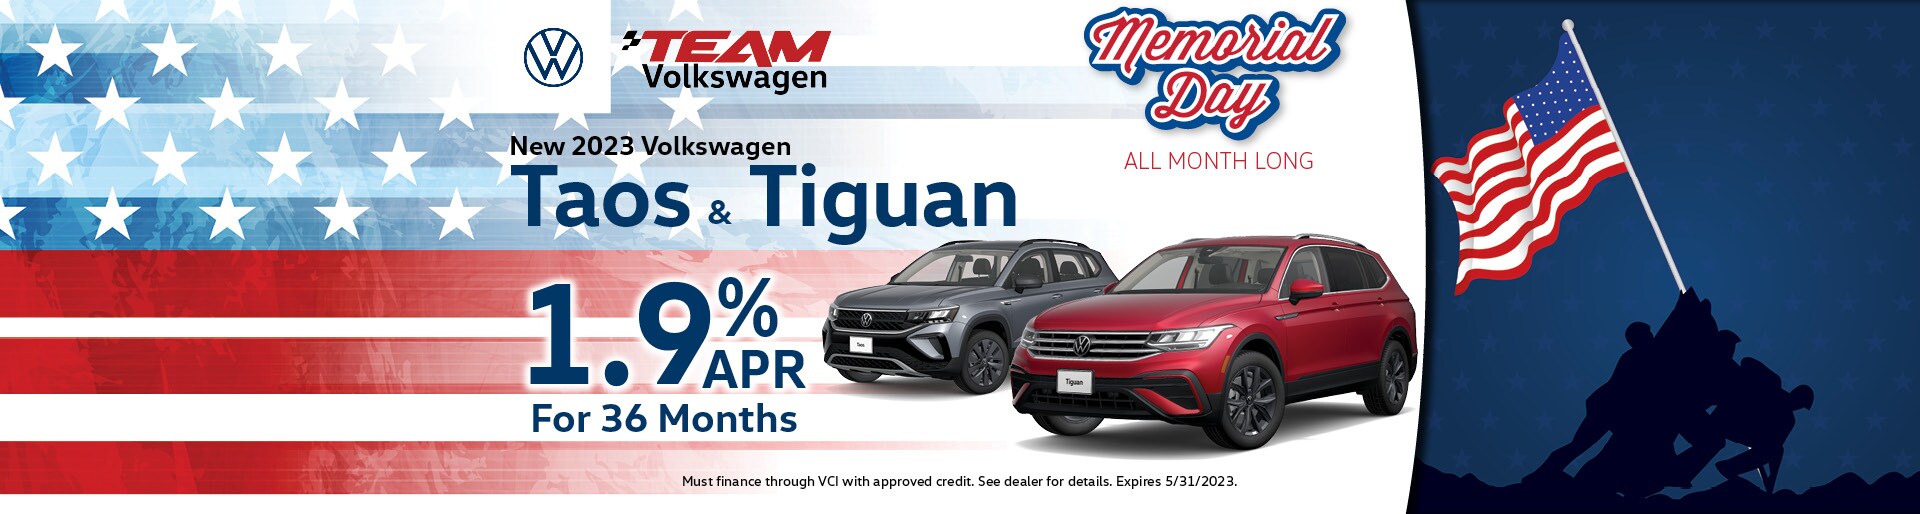 New 2023 Volkswagen Taos and Tiguan for 1.9% APR for 36 months